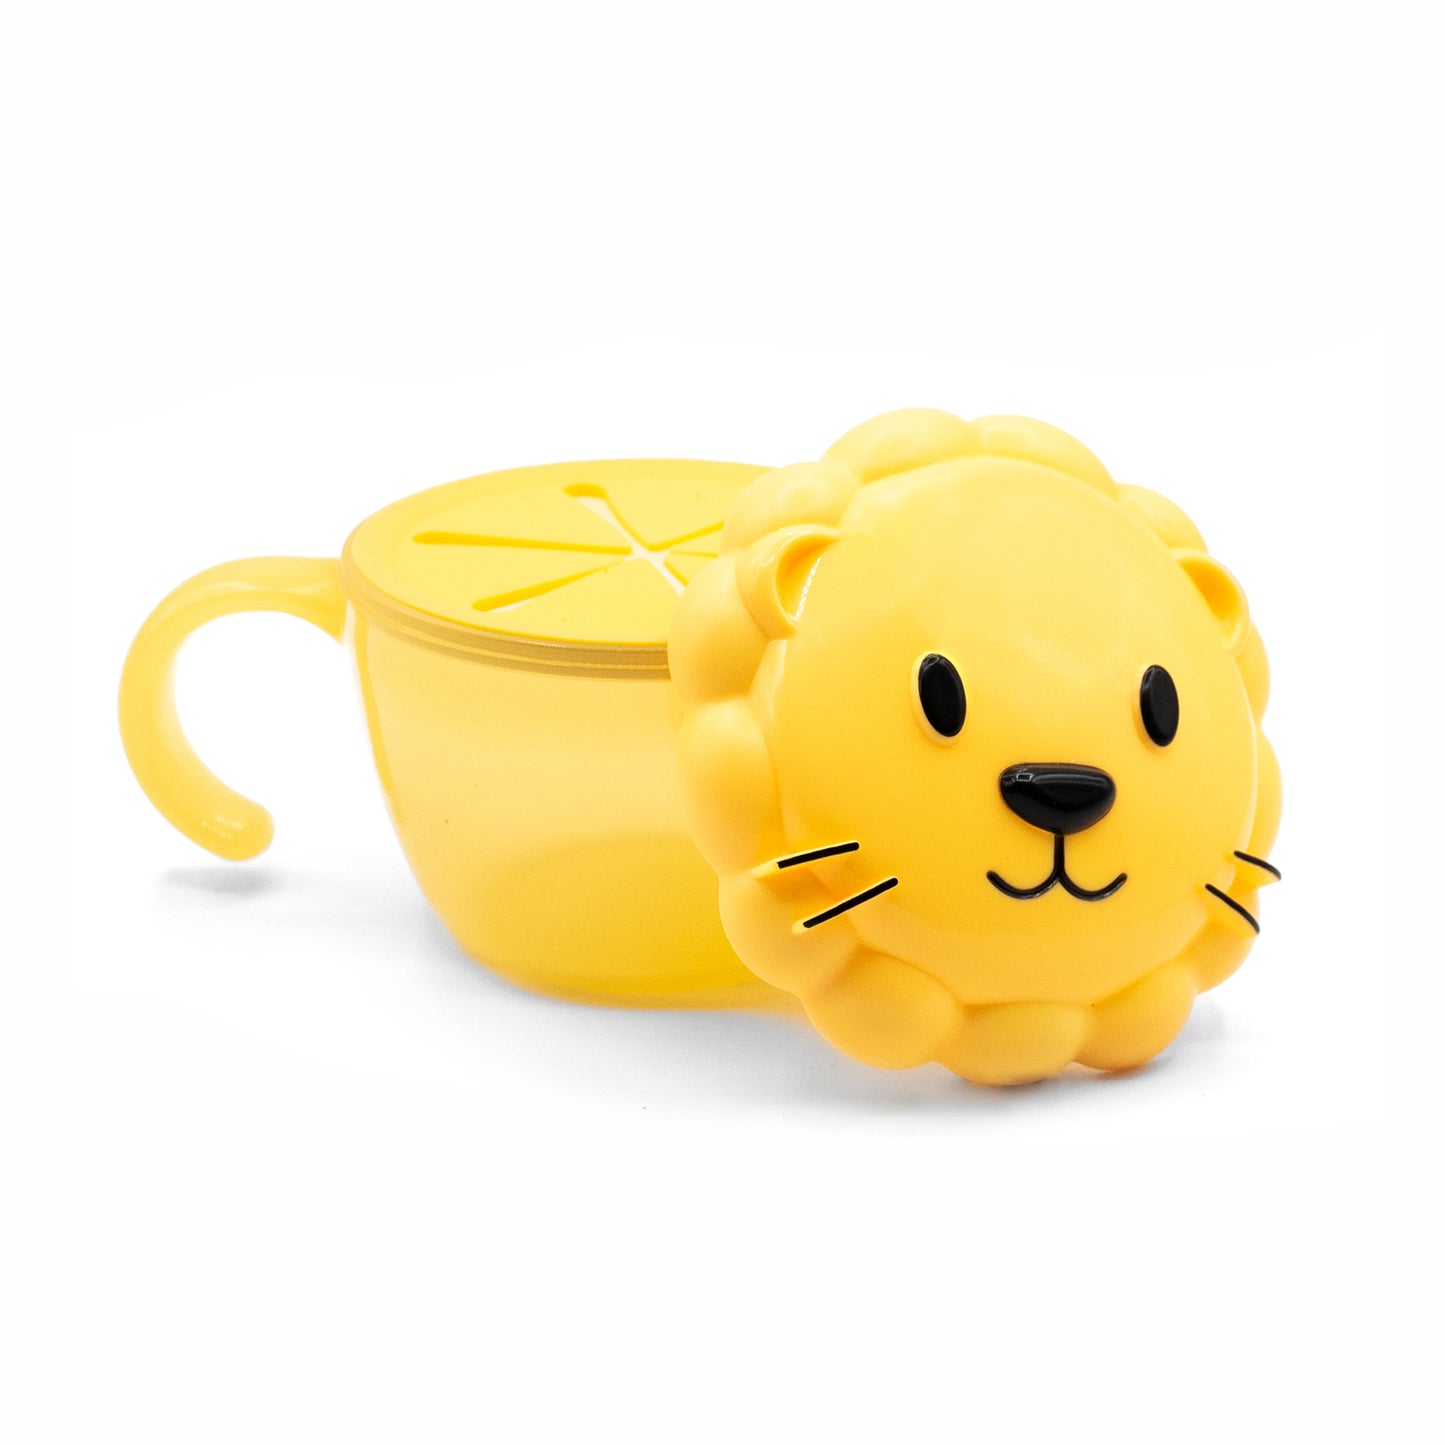 melii Snack Container for Kids - Yellow Lion Design Mess Free, Adaptable, and Easy to Hold with Removable Finger Trap - Perfect for Independent Snacking, Travel - BPA Free and Dishwasher Safe